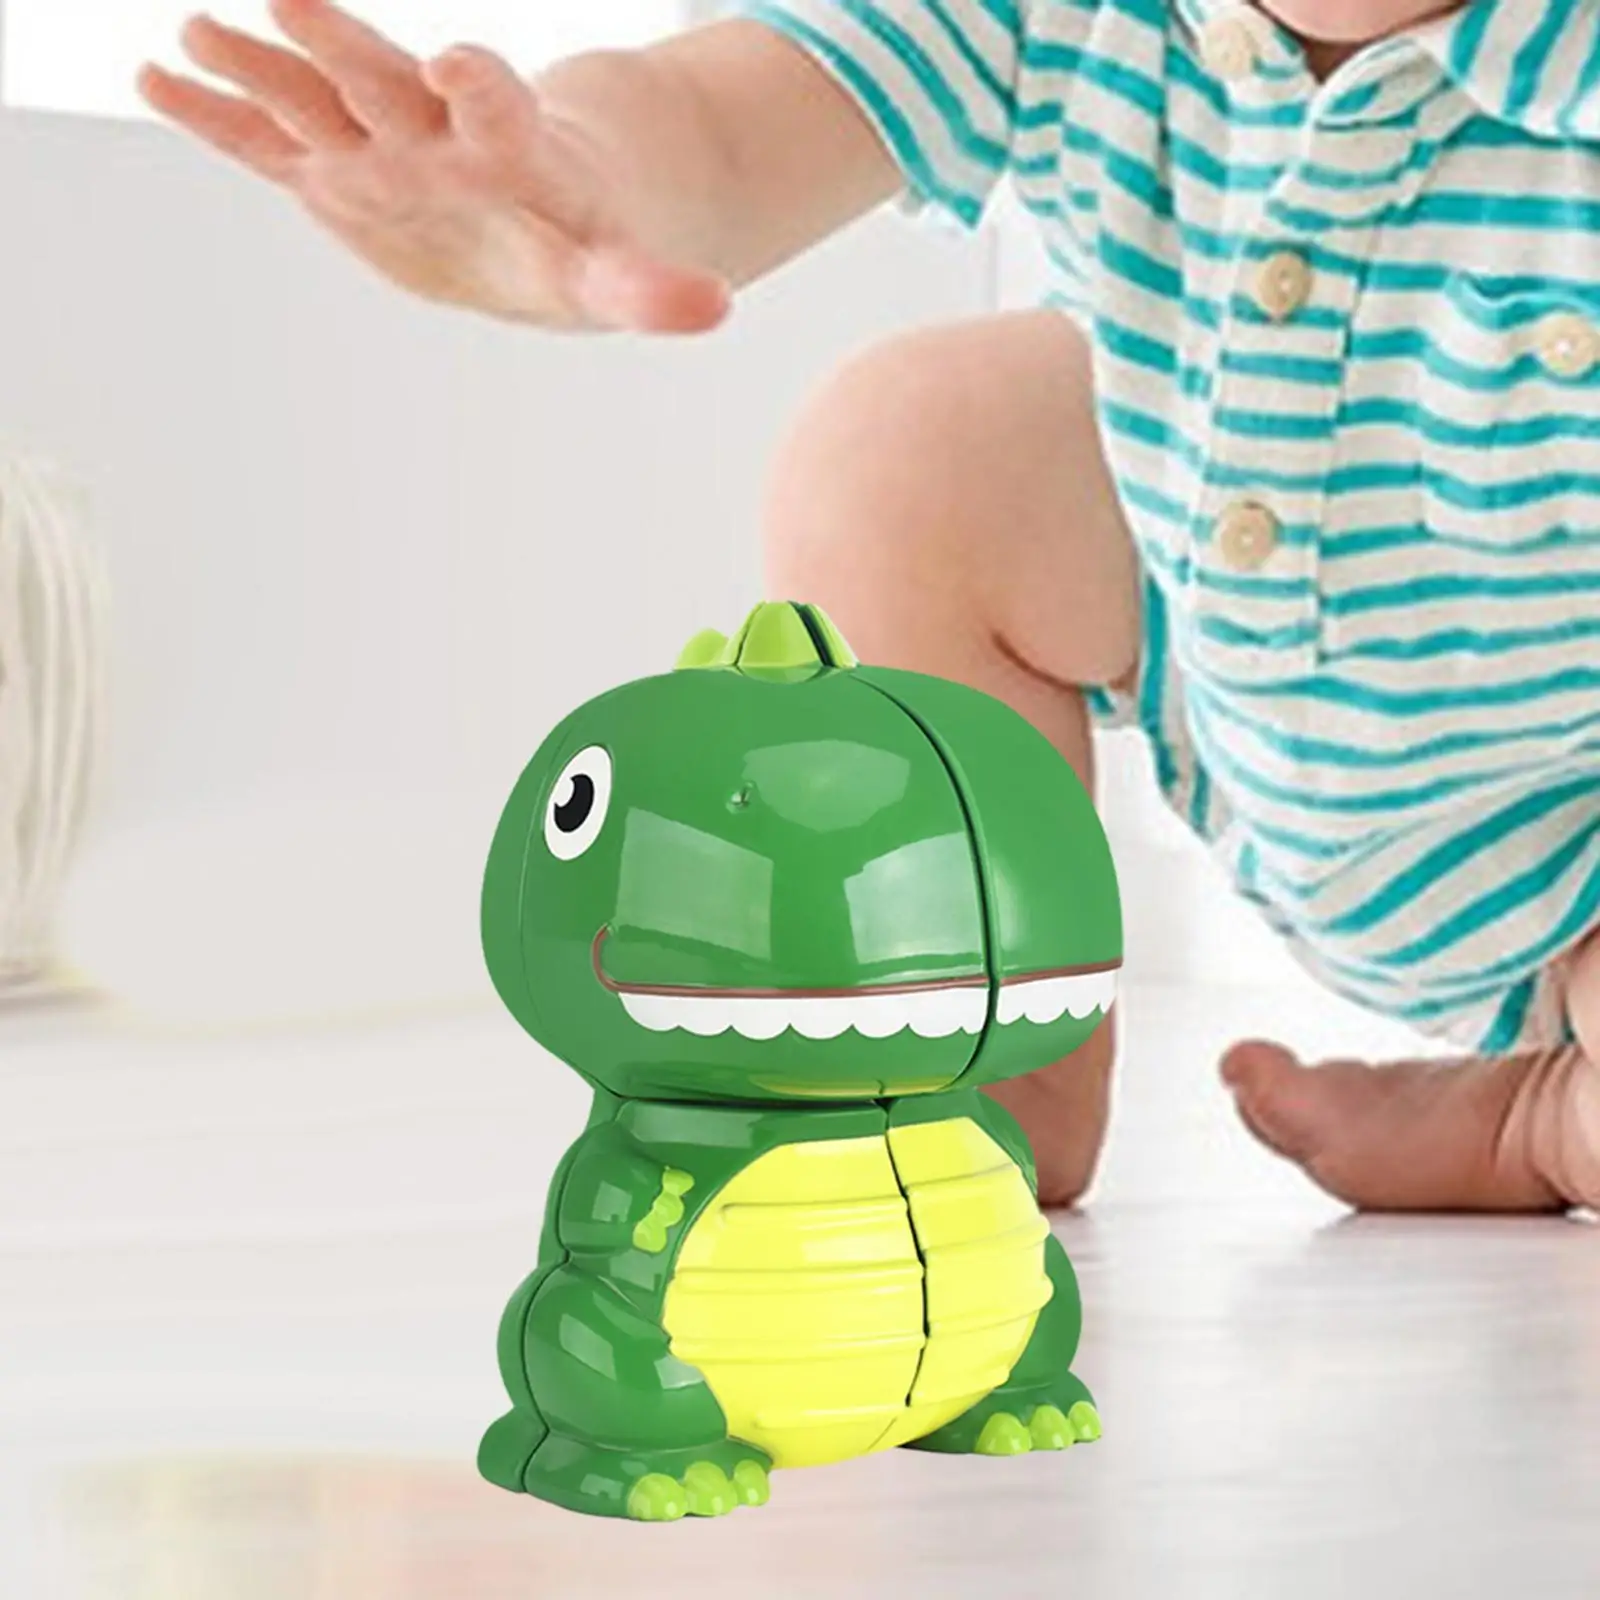 Dinosaur Speed Cube Color Recognition Kids Funny Dinosaur Toy for Creativity Birthday Hand Flexibility Party Favor Imagination